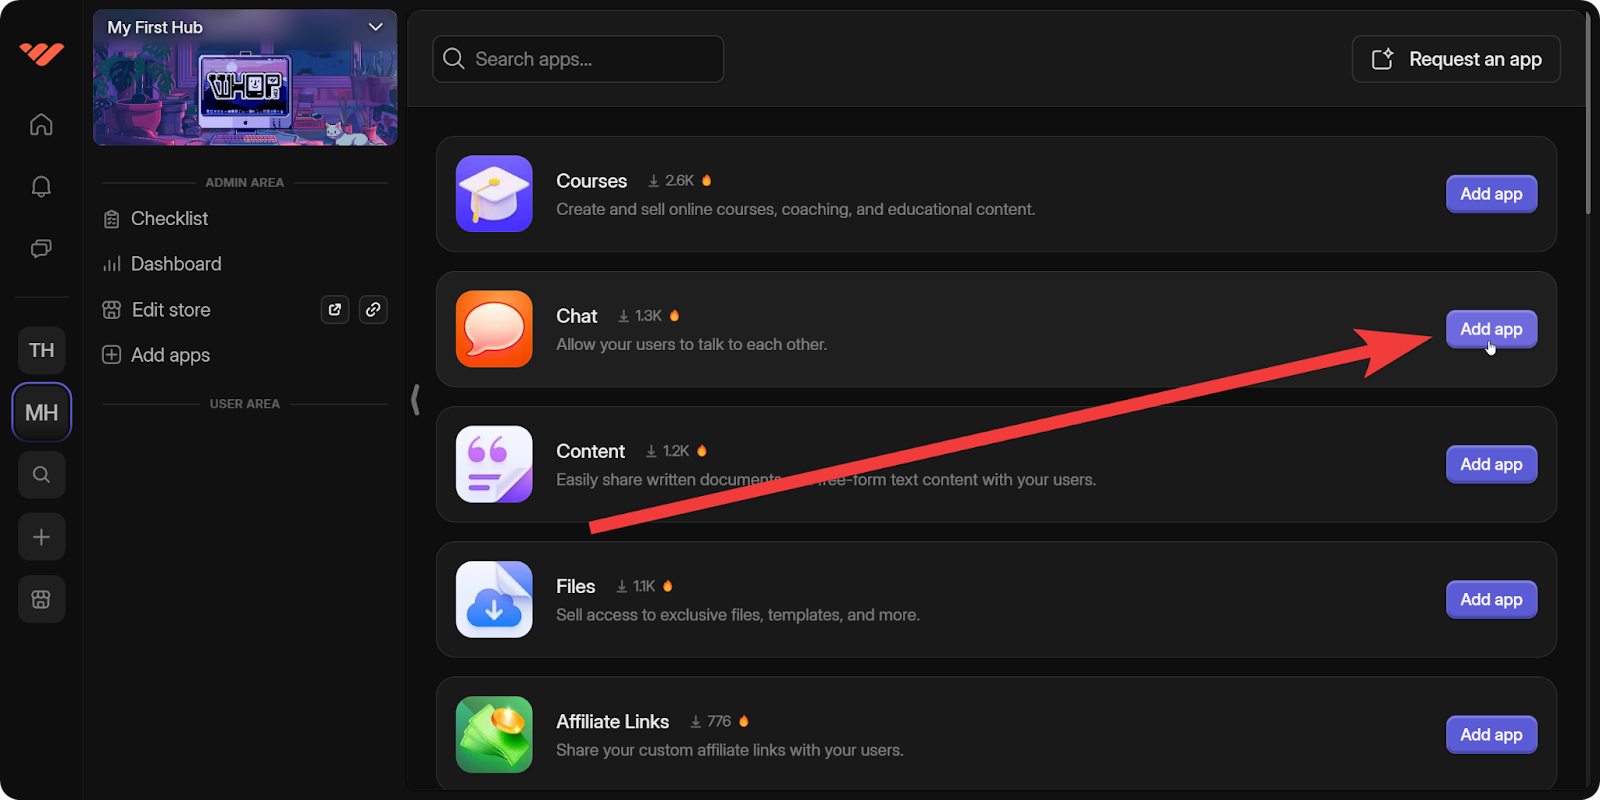 The Add app button of the Chat app highlighted on the Add apps section of a Hub on Whop